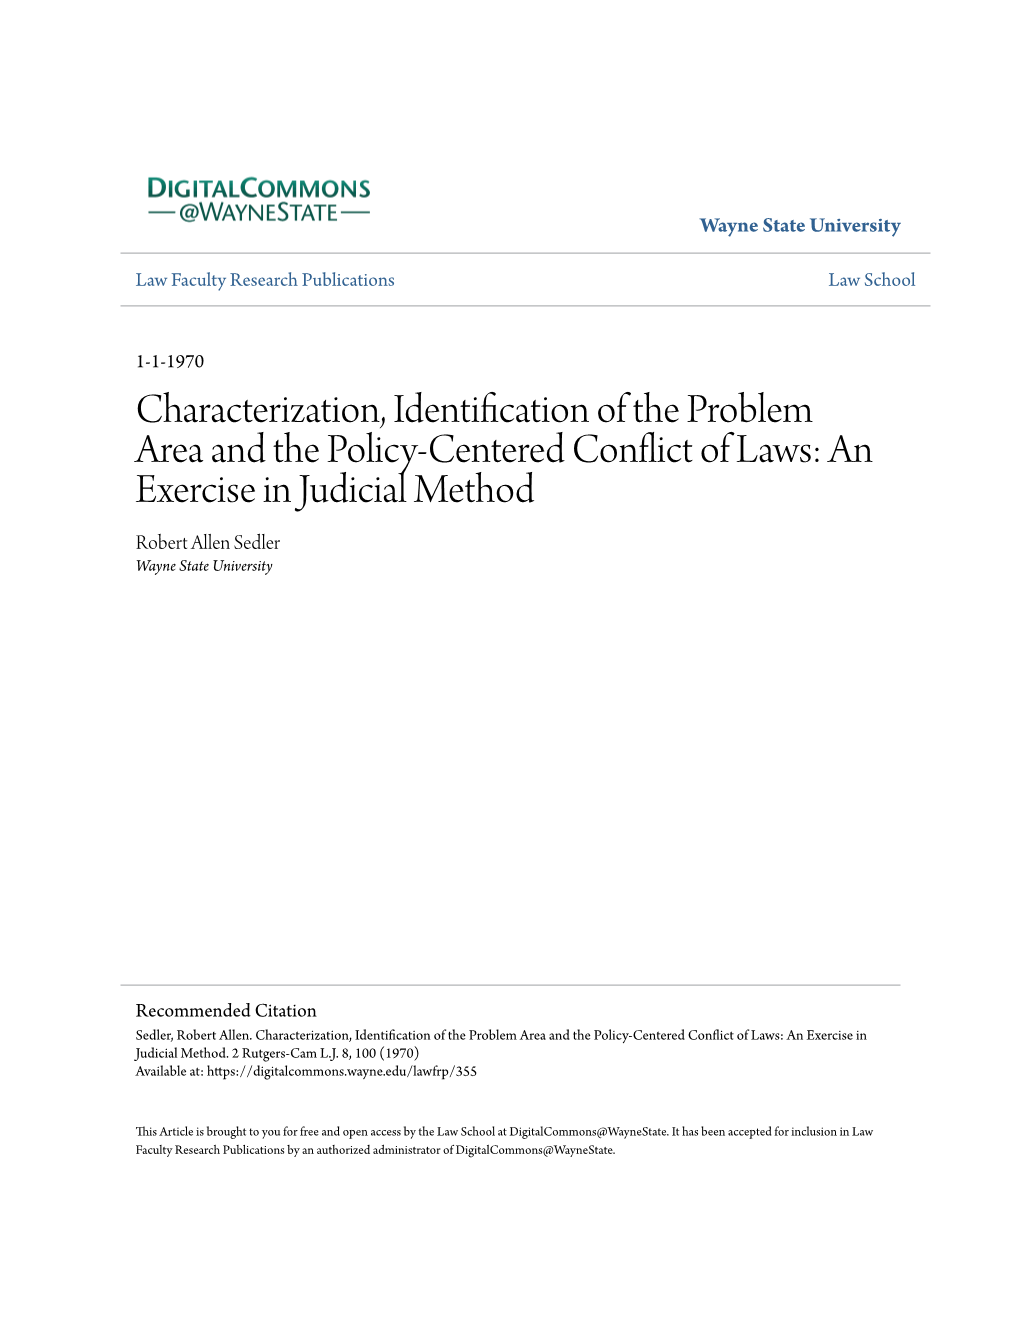 Characterization, Identification of the Problem Area and the Policy-Centered Conflict of Laws